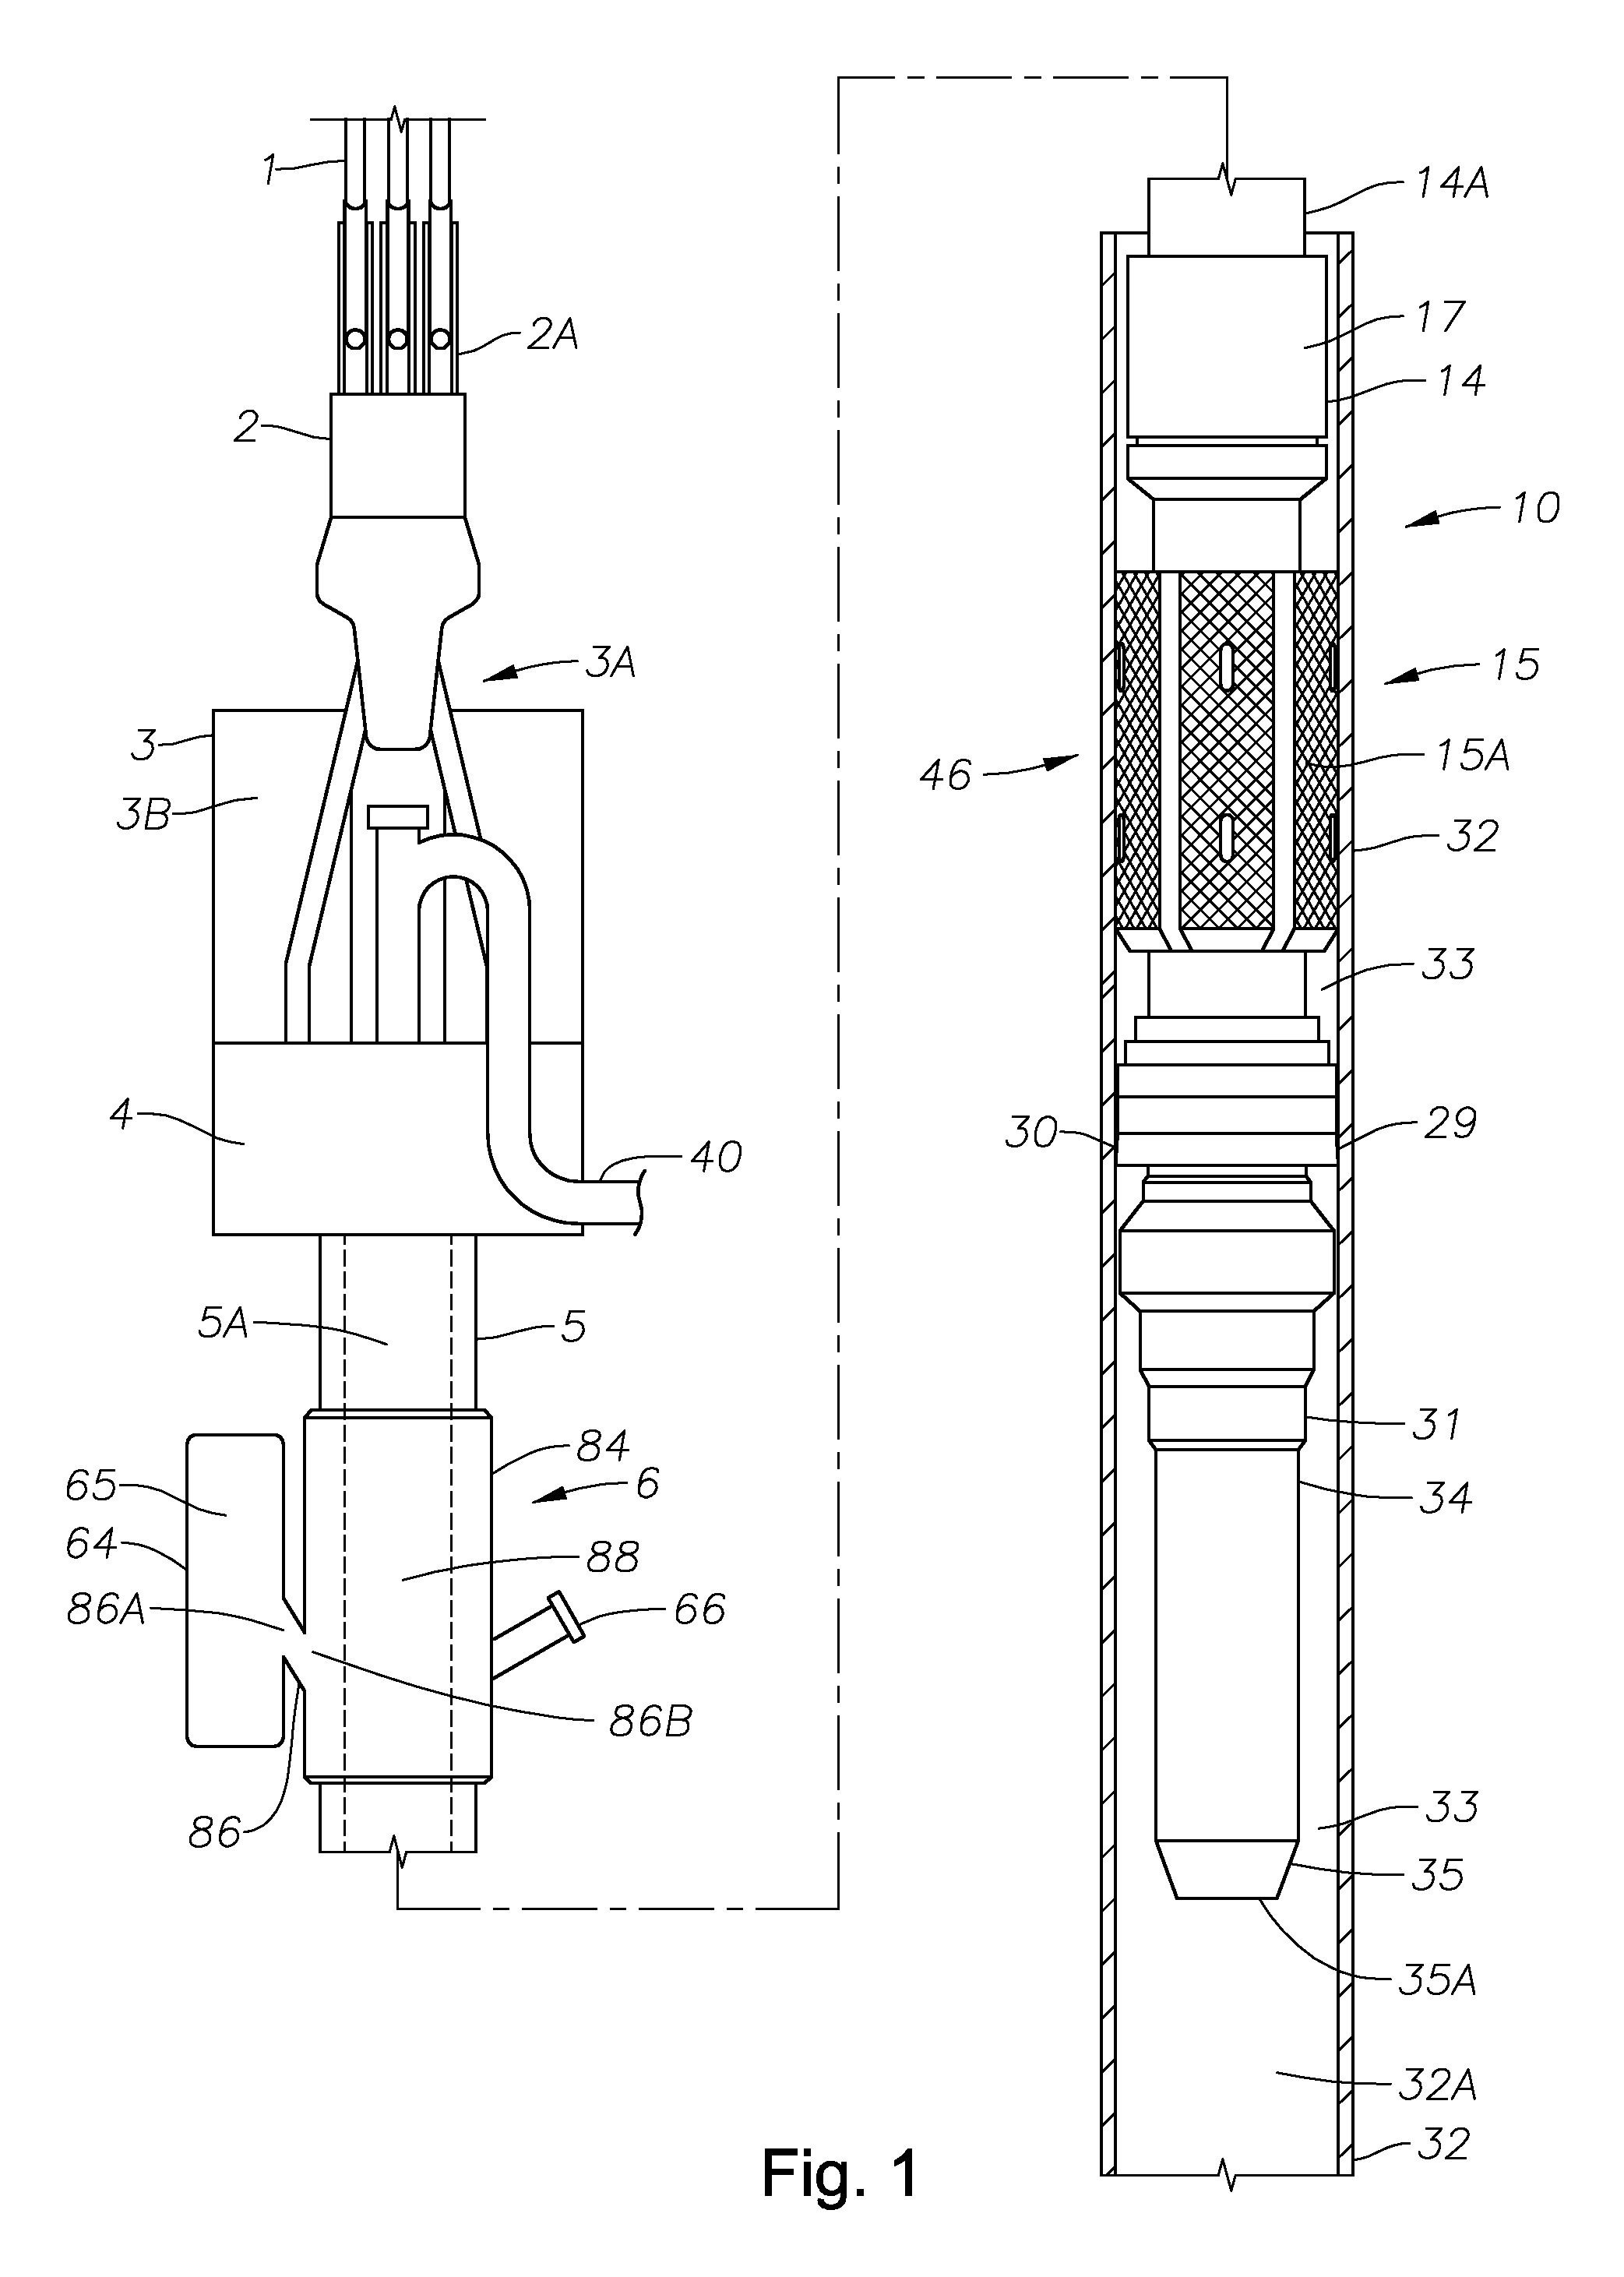 Casing make-up and running tool adapted for fluid and cement control